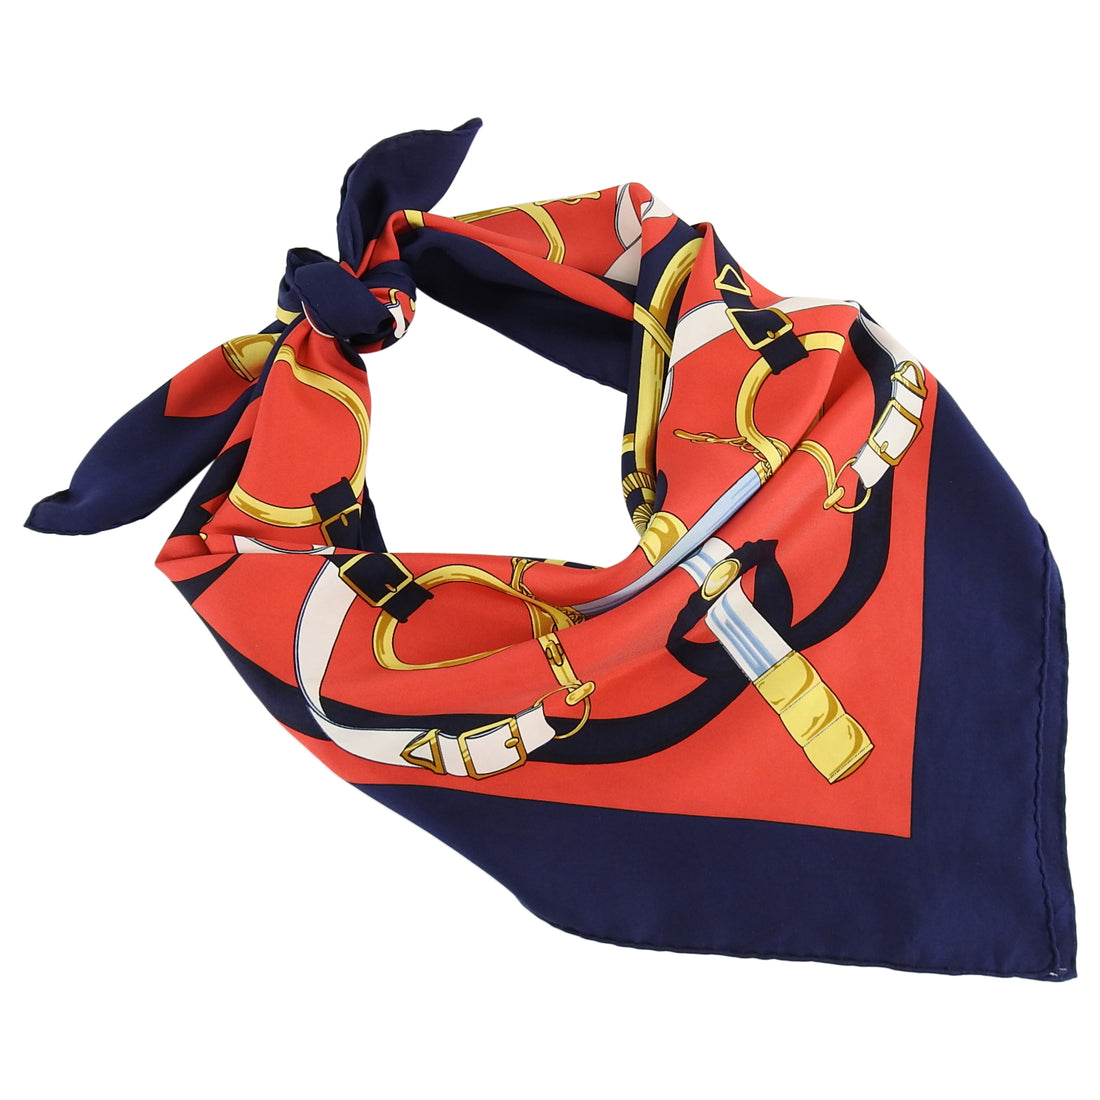 Hermes Eperon D’or Silk Twill 90cm Scarf Red and Navy – I MISS YOU VINTAGE